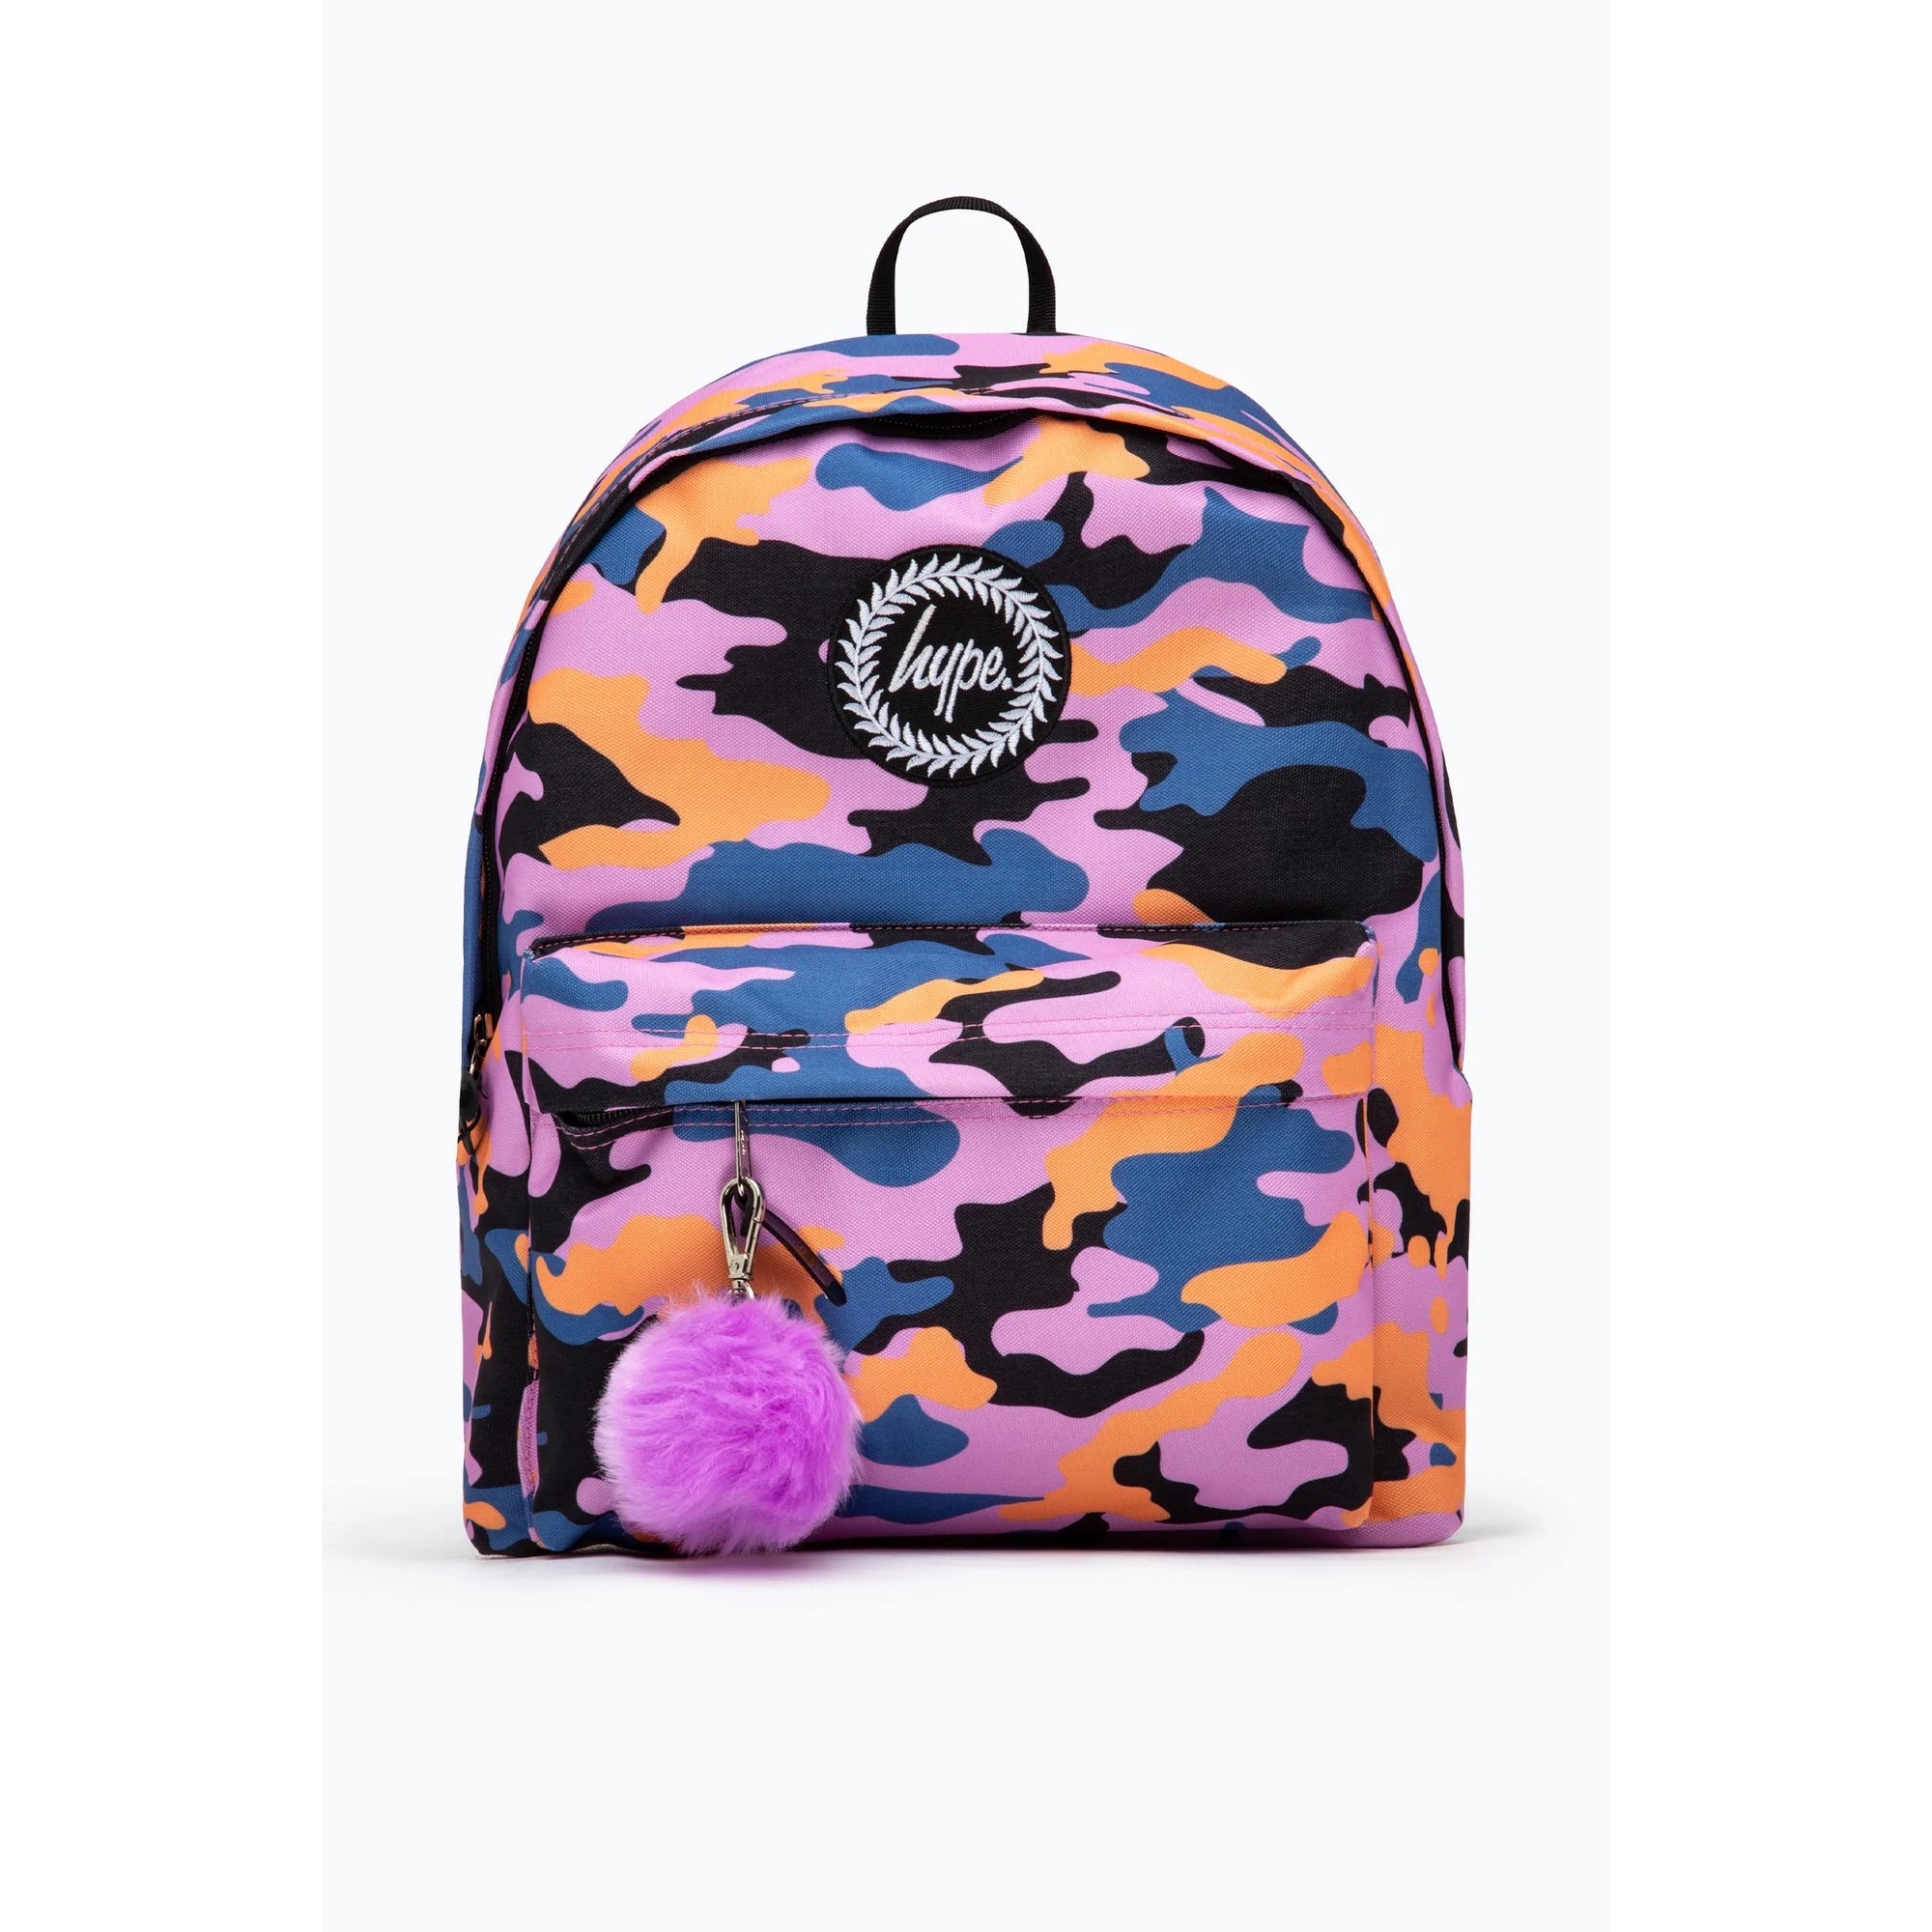 Hype Purple Orange Camo Backpack Twlg 754 Accessories ONE SIZE / Multi